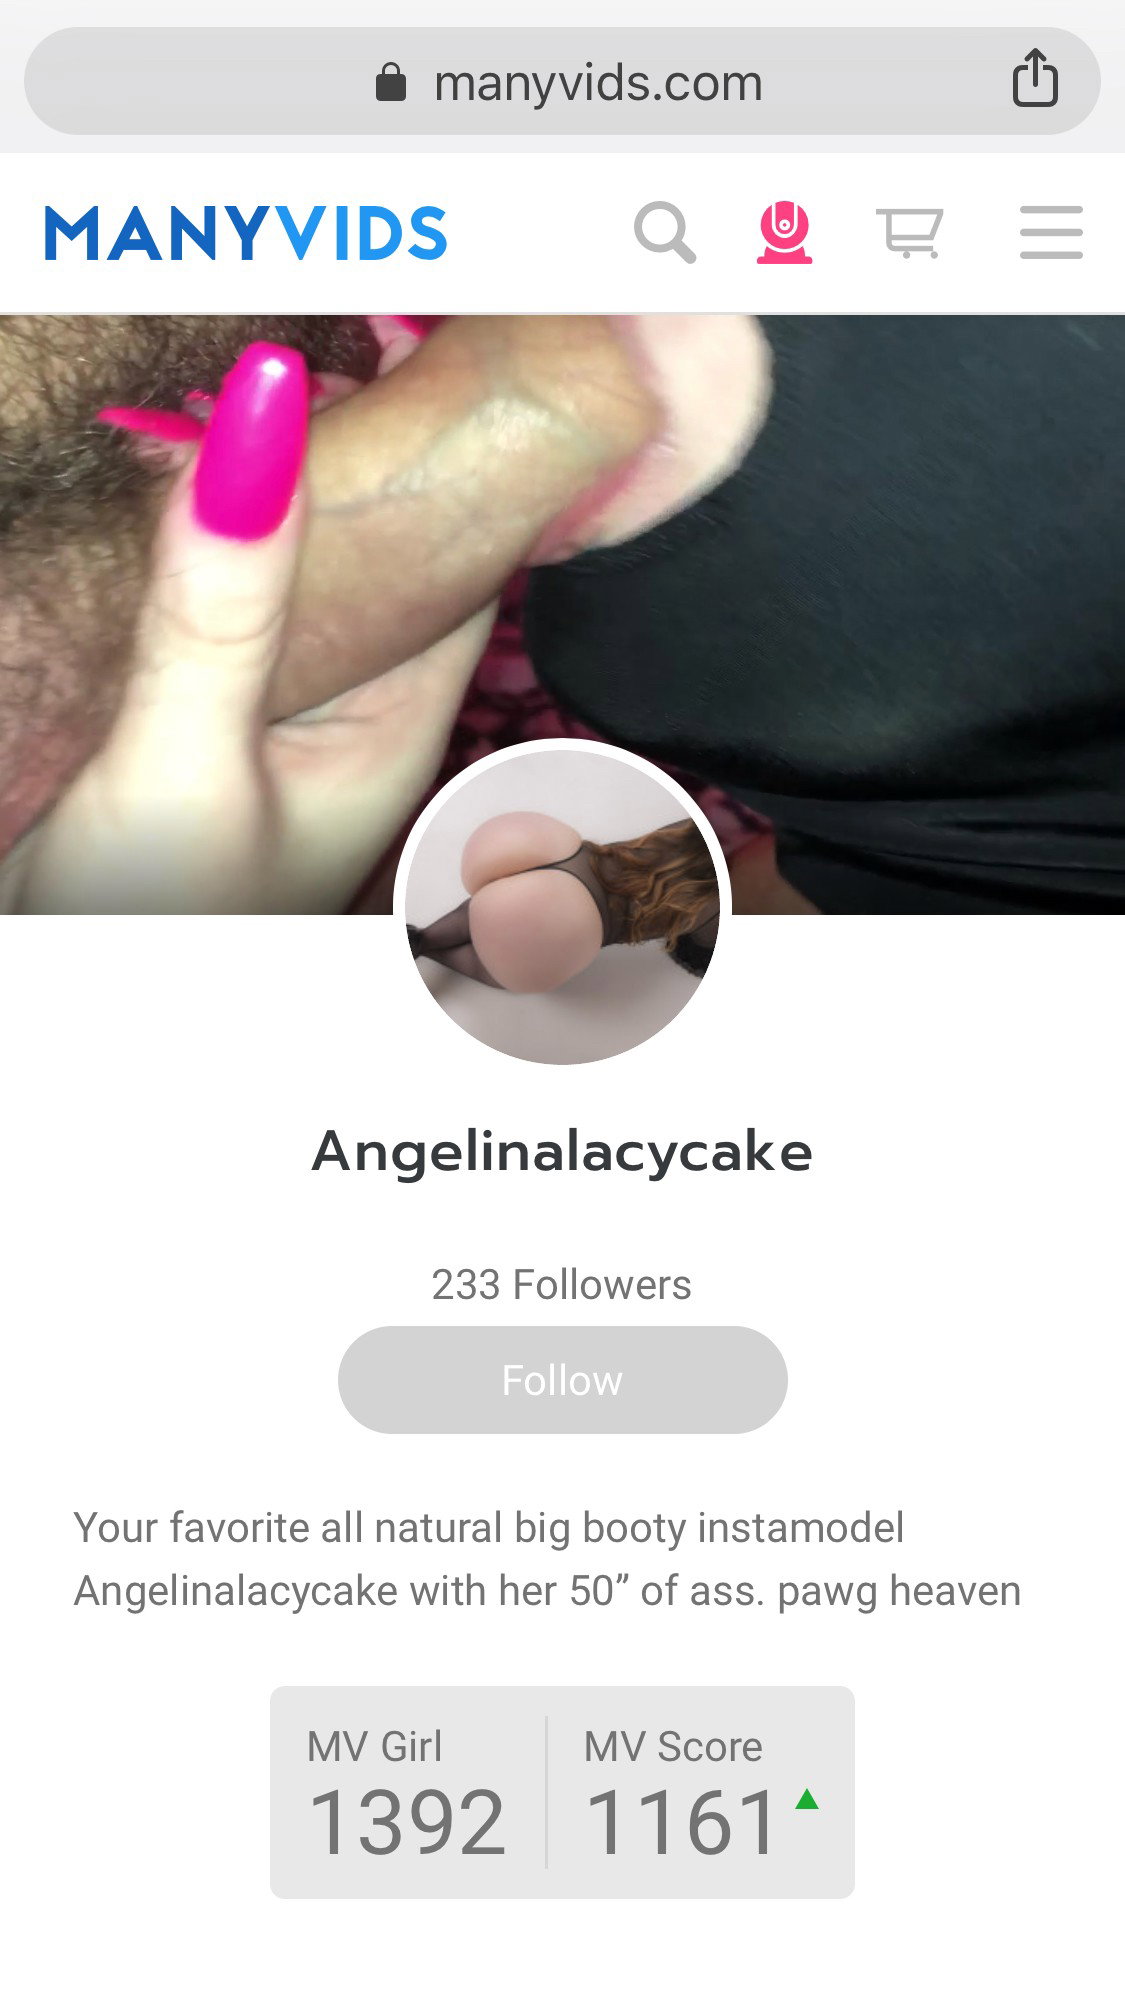 Post by Angelinalacycake with the username @Angelinalacycake, who is a star user,  January 3, 2019 at 6:25 PM. The post is about the topic blowjob and the text says 'Follow me for best dick sucking videos'